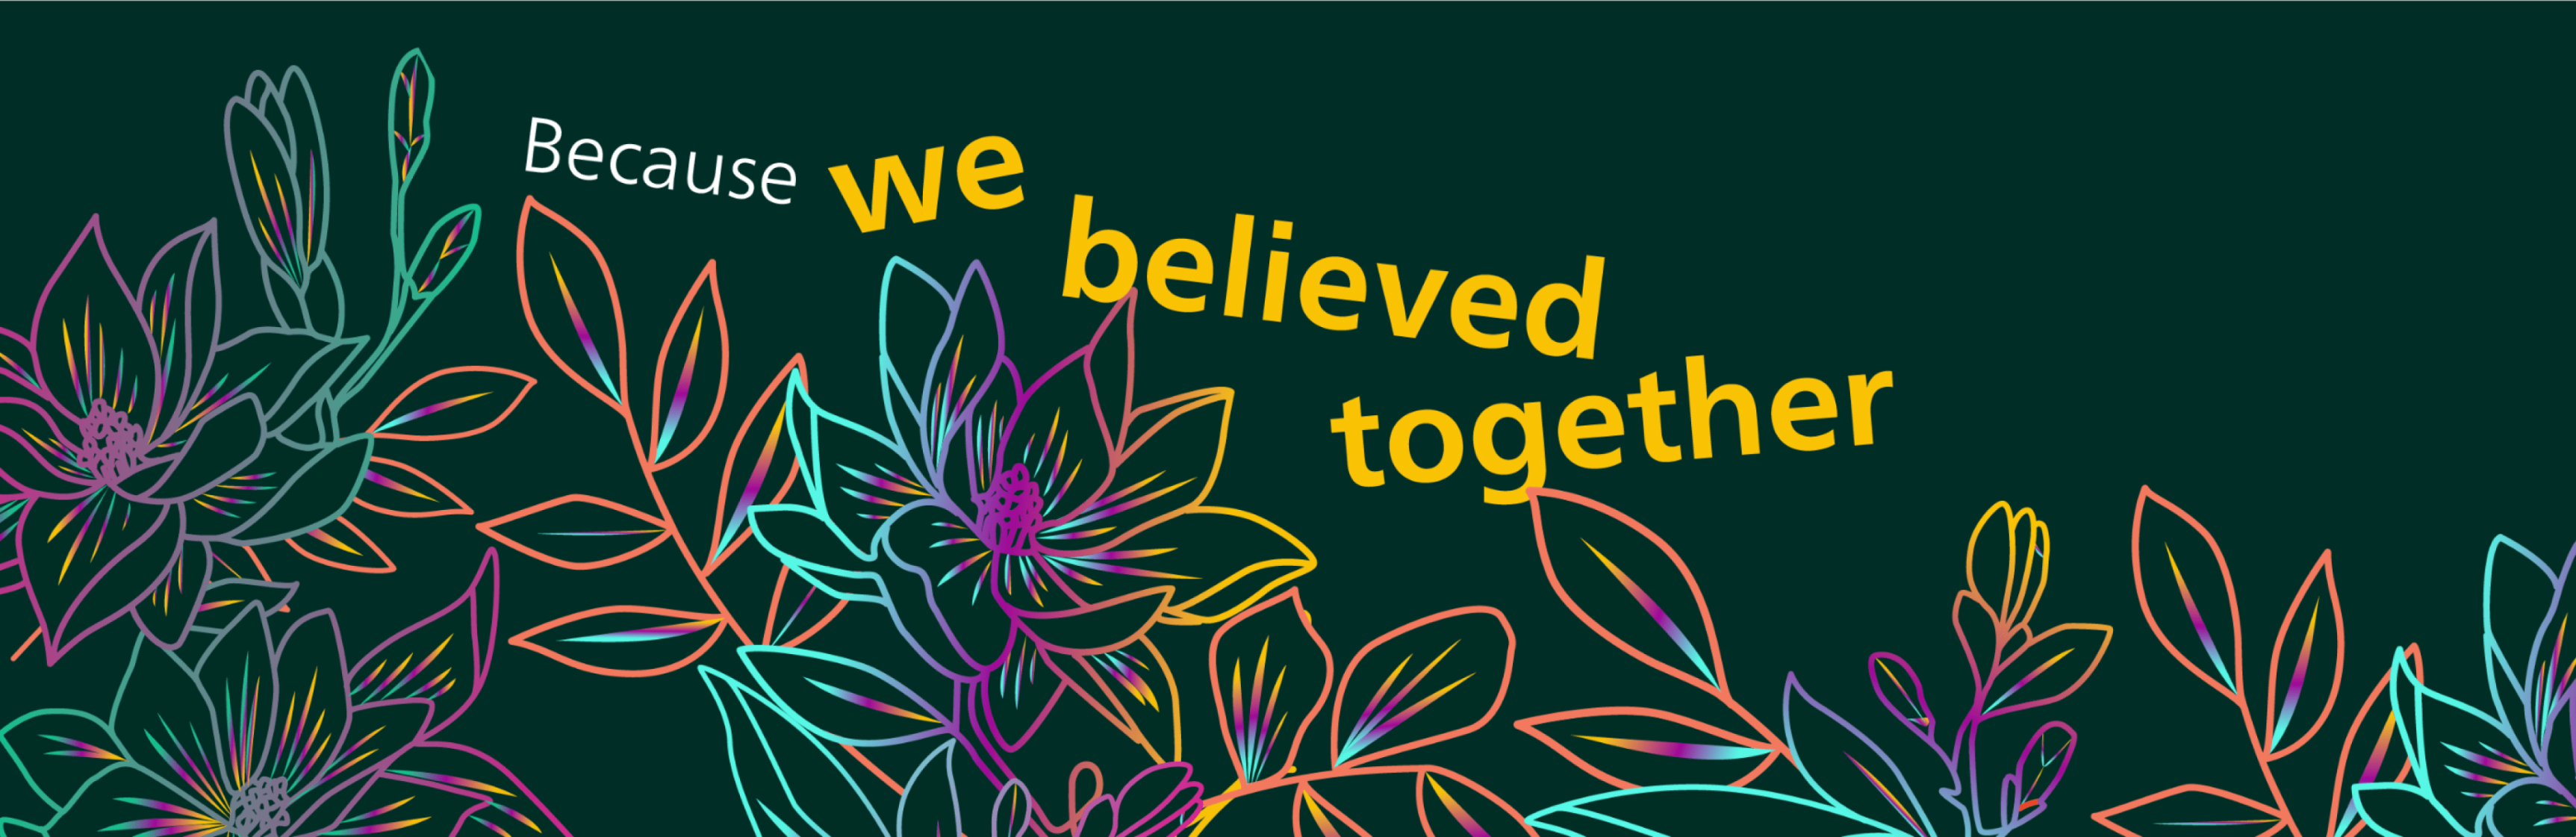 Graphic that says "Because we believed together"